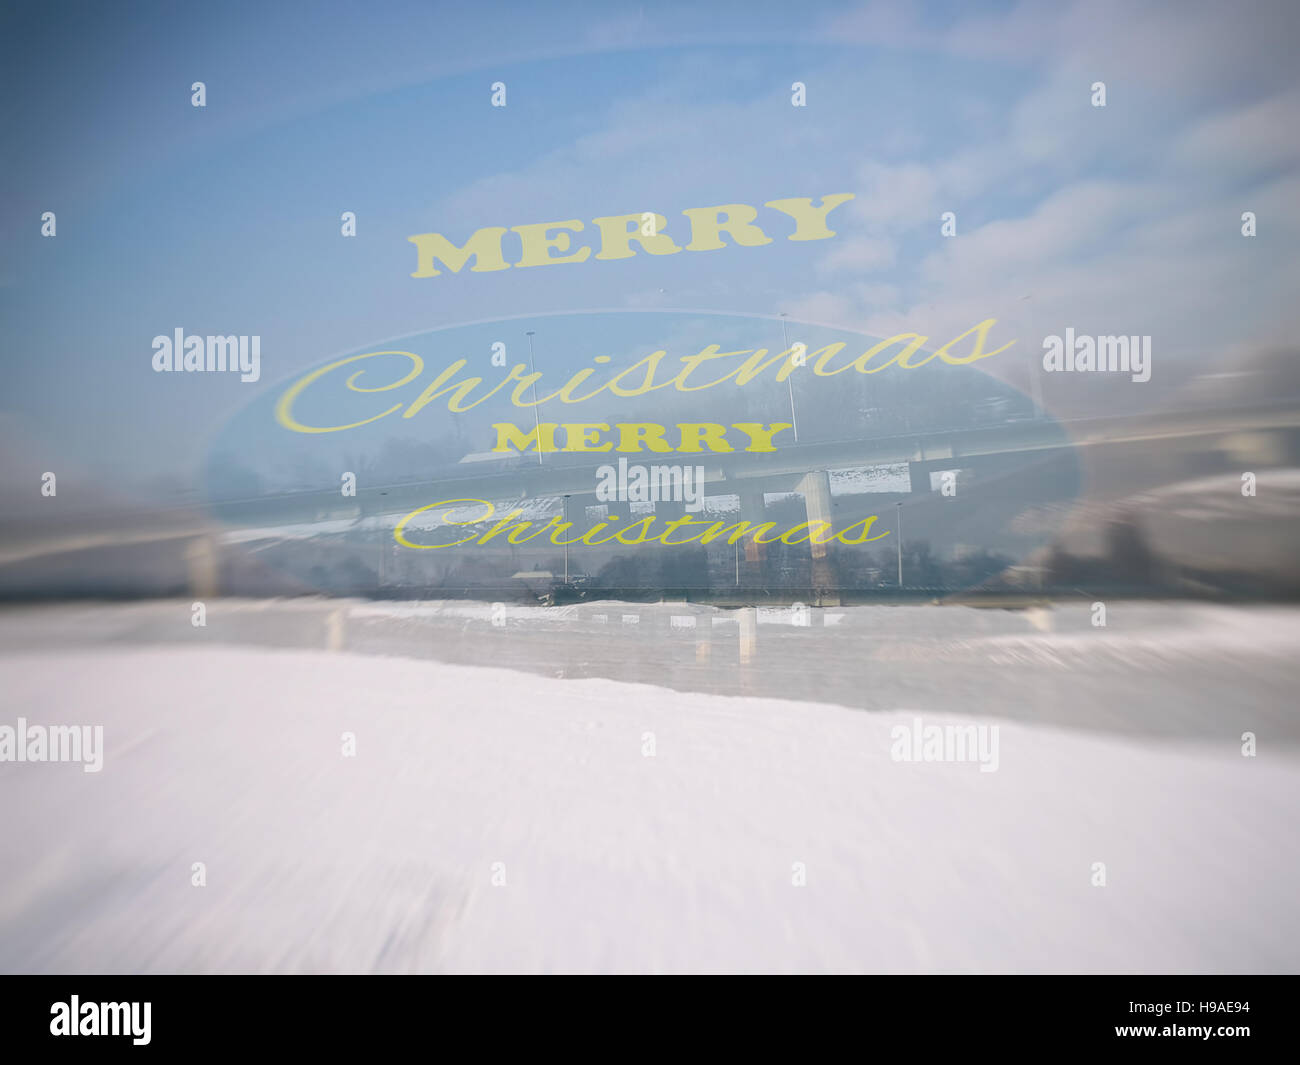 Merry Christmas, winter, snow, double vision, double exposure,  motivation; poster; quote; blurred images Stock Photo